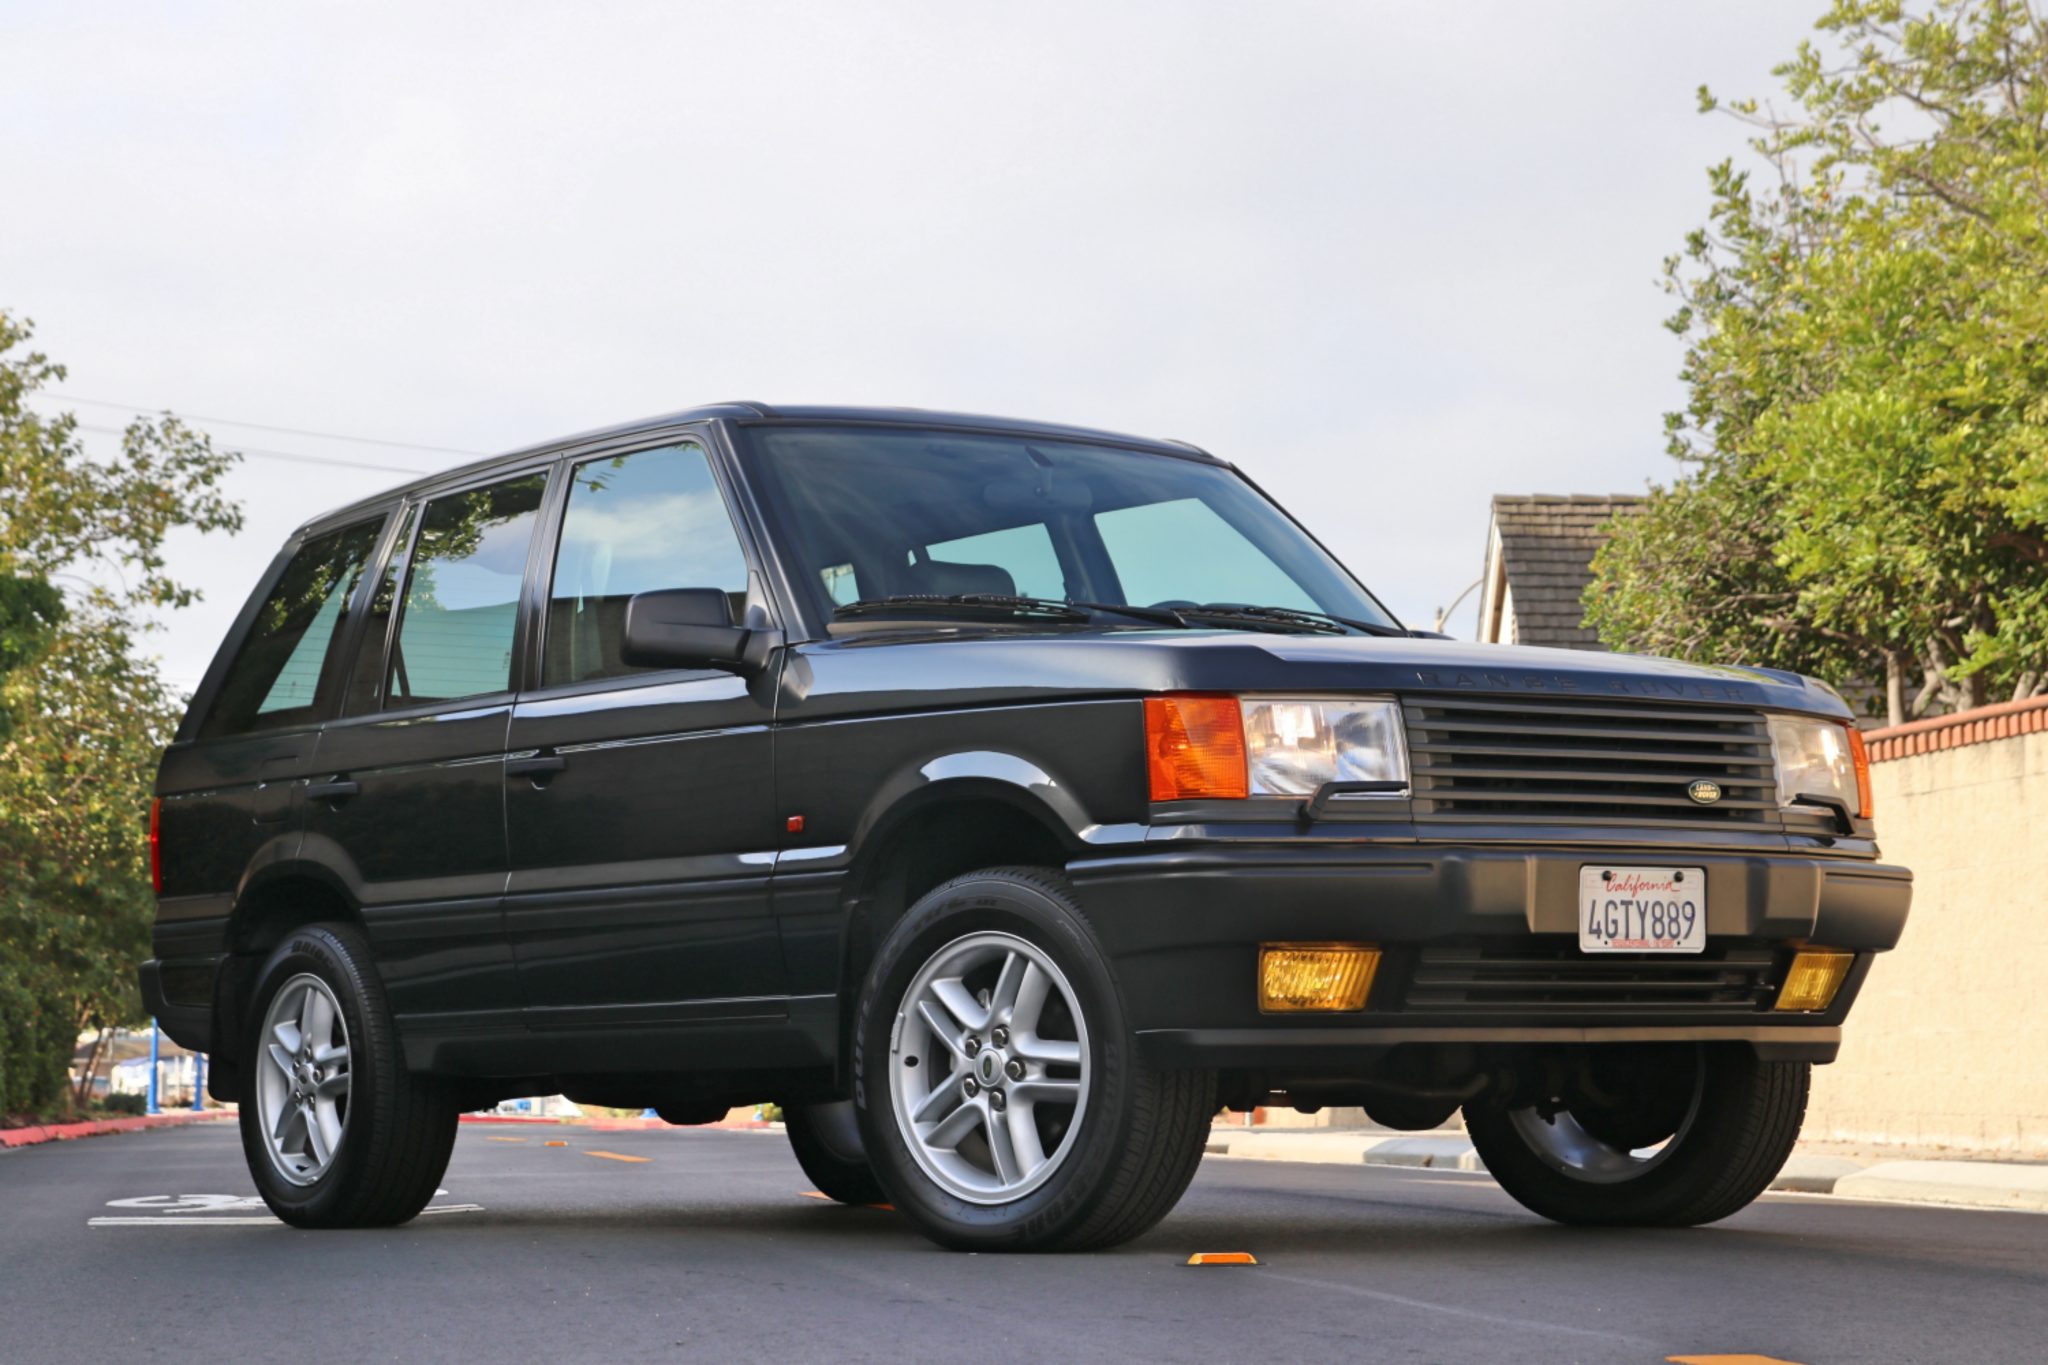 No Reserve: 1999 Land Rover Range Rover 4.6 HSE for sale on BaT Auctions -  sold for $17,500 on July 26, 2022 (Lot #79,692) | Bring a Trailer